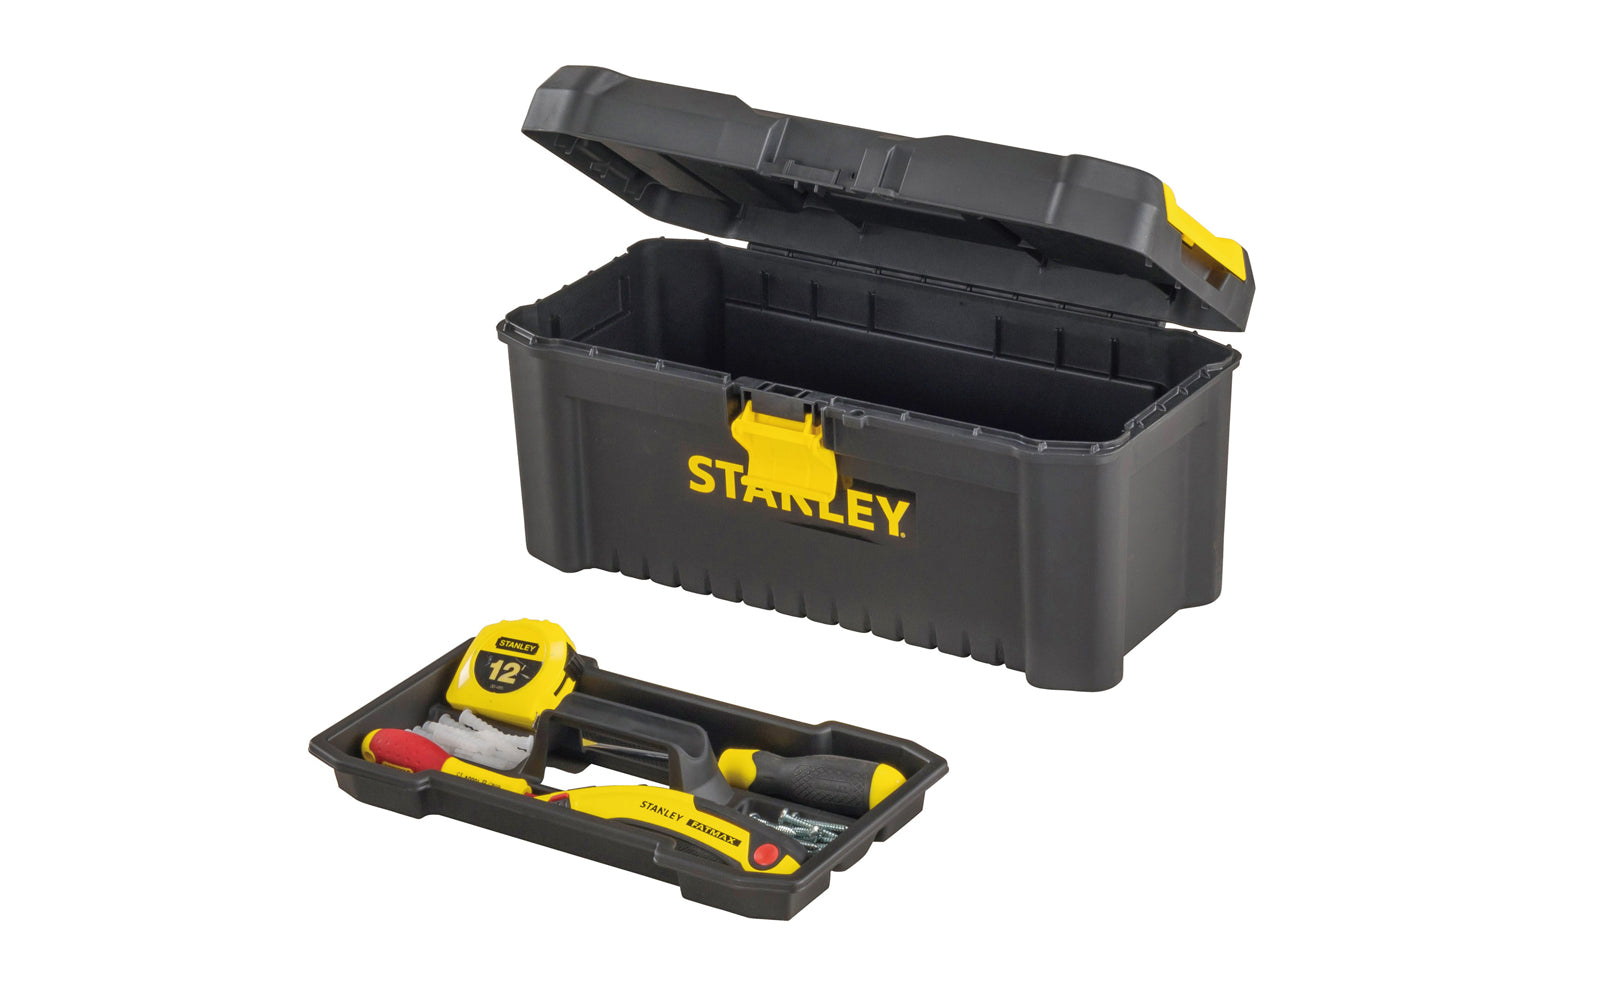 Stanley 16" "Essential" Toolbox is newly redesigned & engineered to satisfy virtually any storage need. It has top organizers for small parts organization & includes a tool tray with handle. It also has a padlock opening, which enables to lock the tool box. 076174755176. Model No. STST16331. Made in Isreal